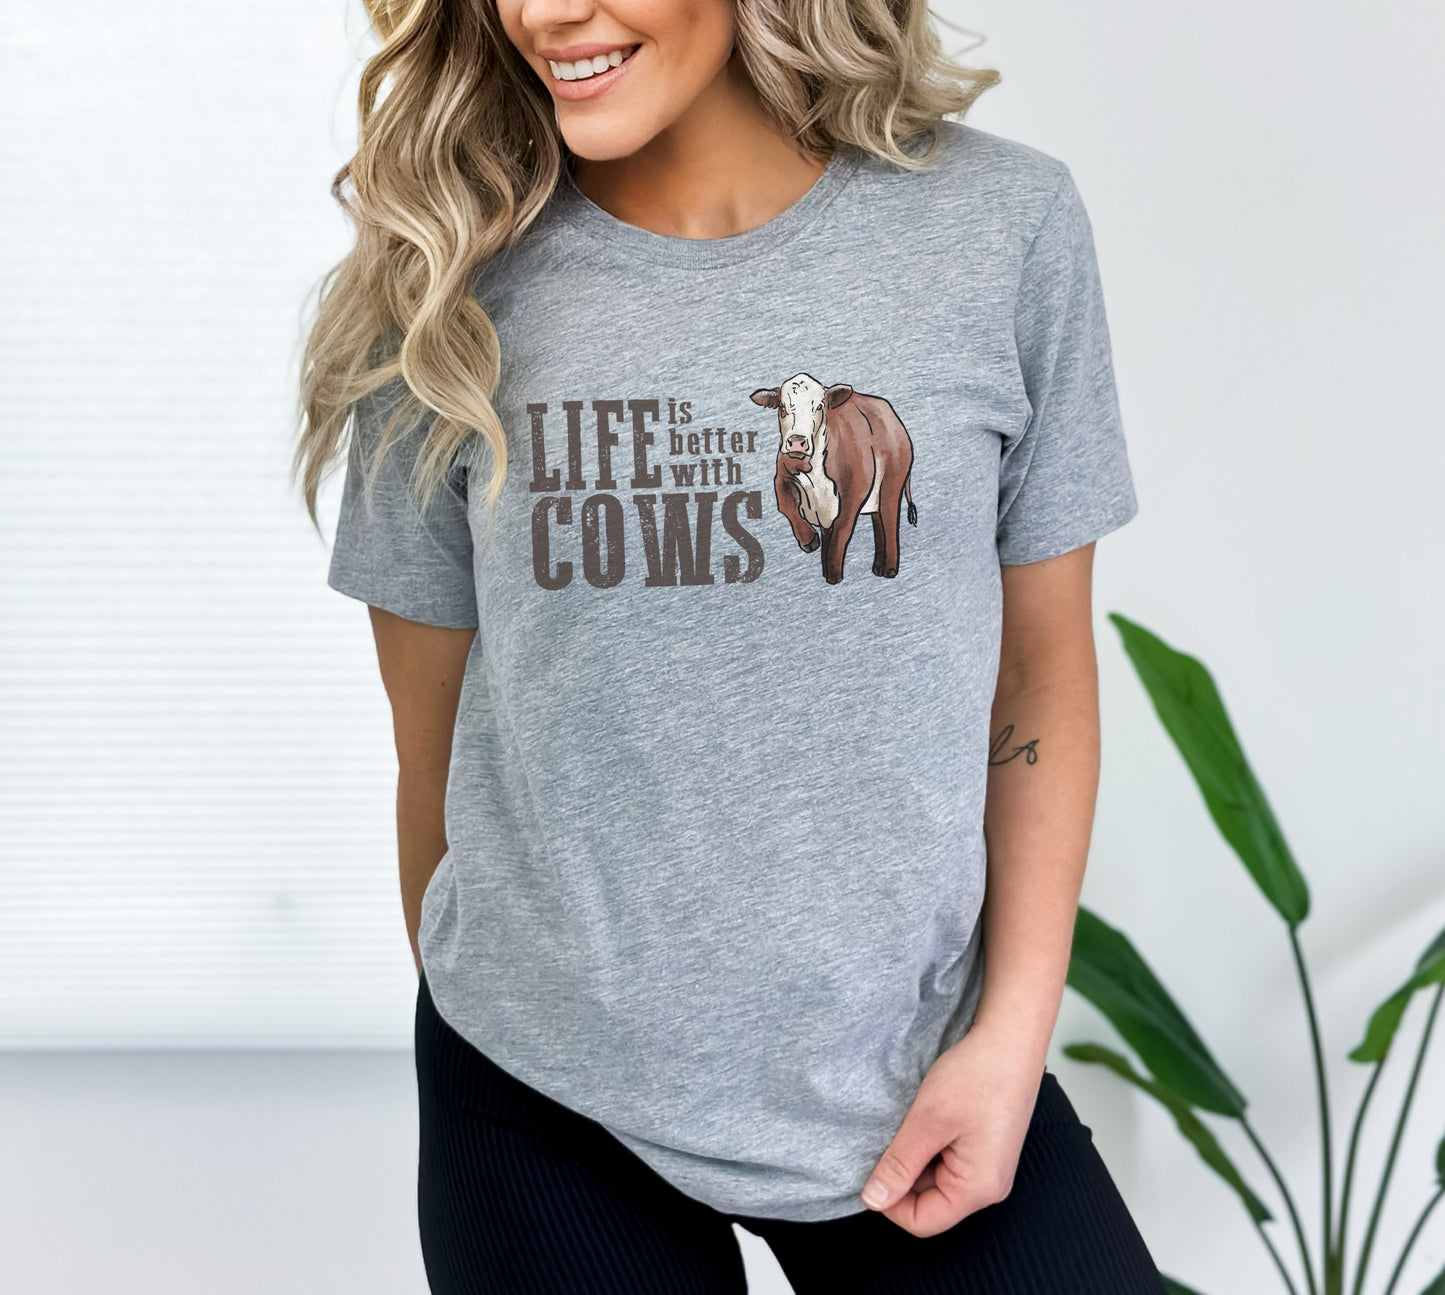 ADULT SIZE "Life is better with cows" Grey T-shirt